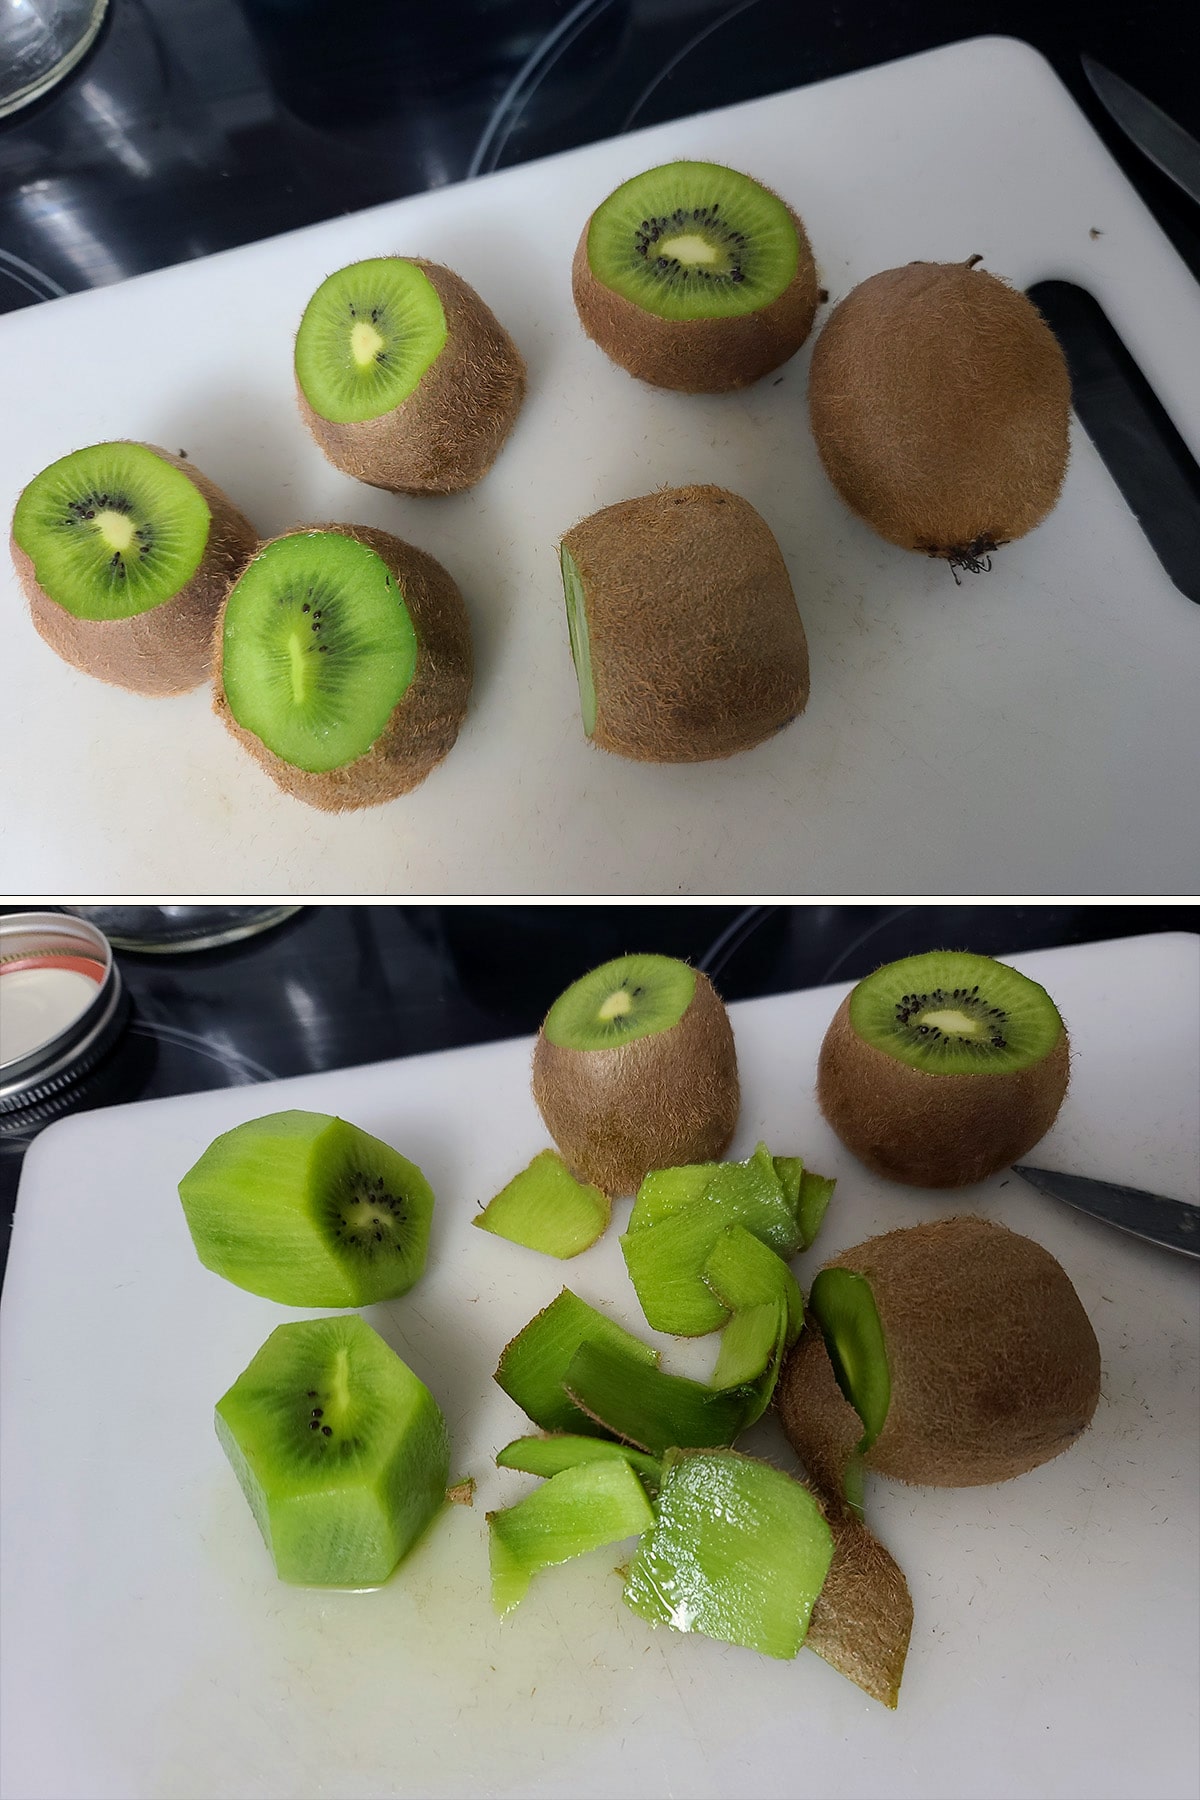 Several kiwis being peeled on a cutting board.